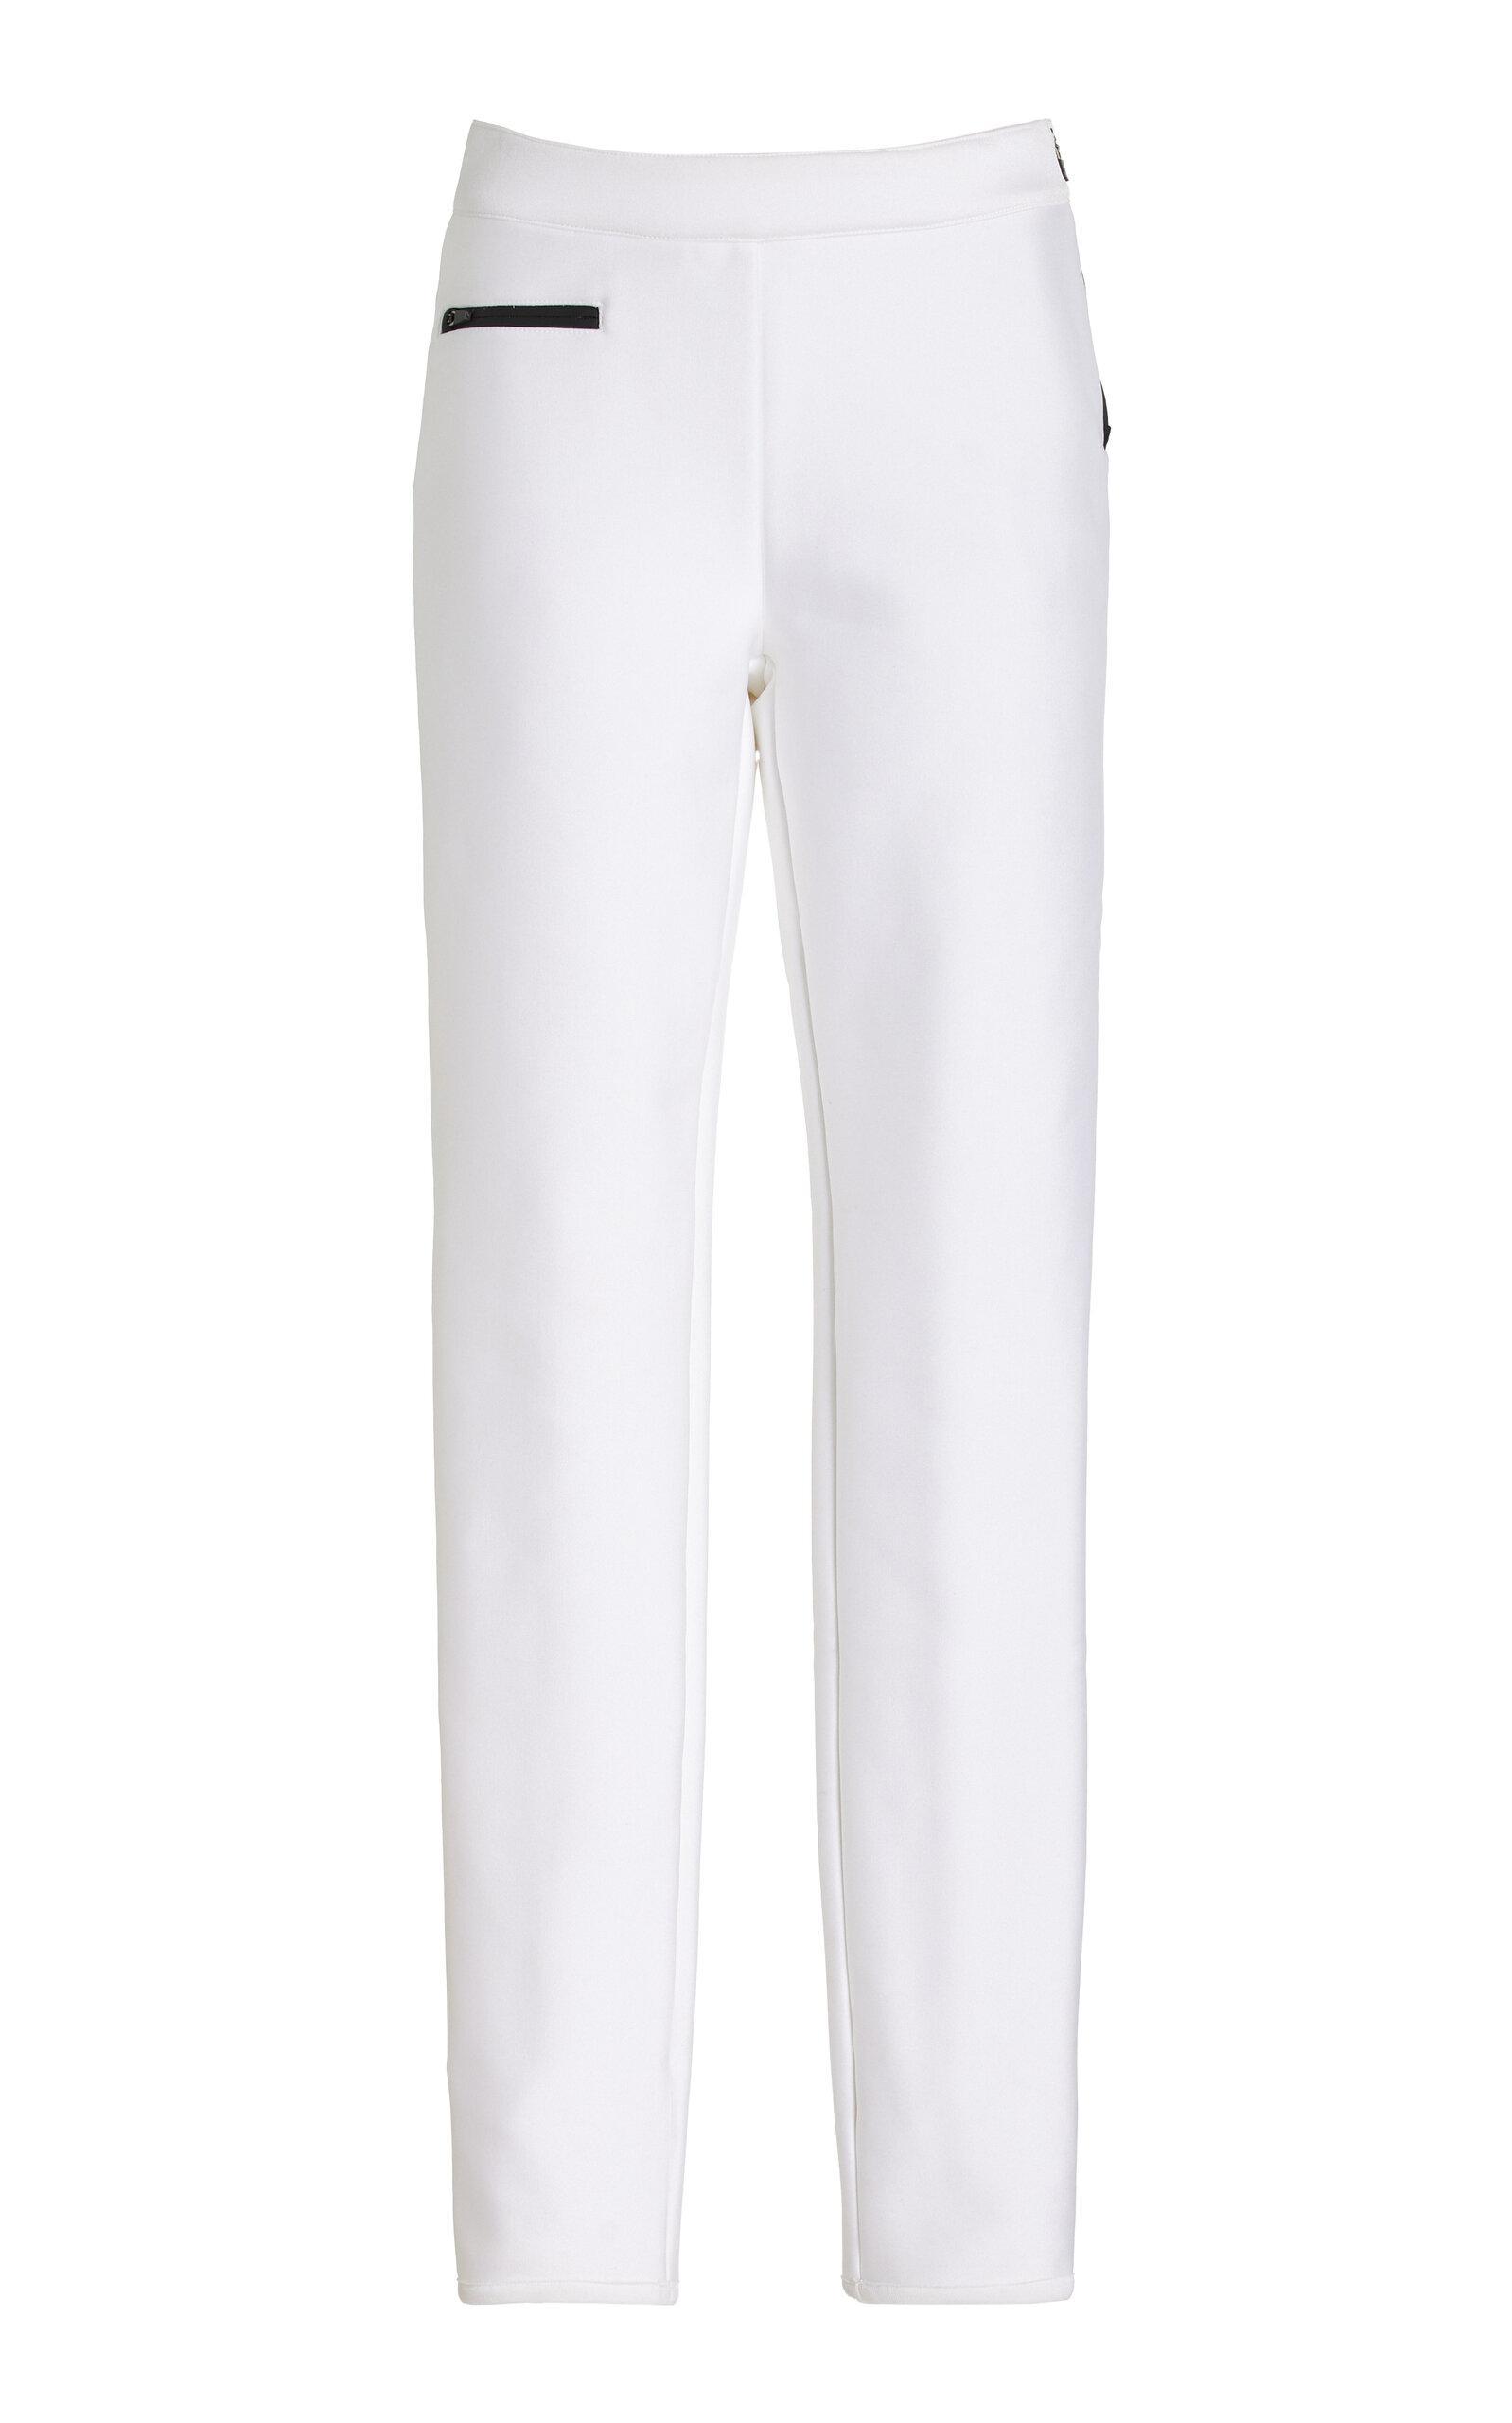 Erin Snow Olivia Pant in White. Product Image